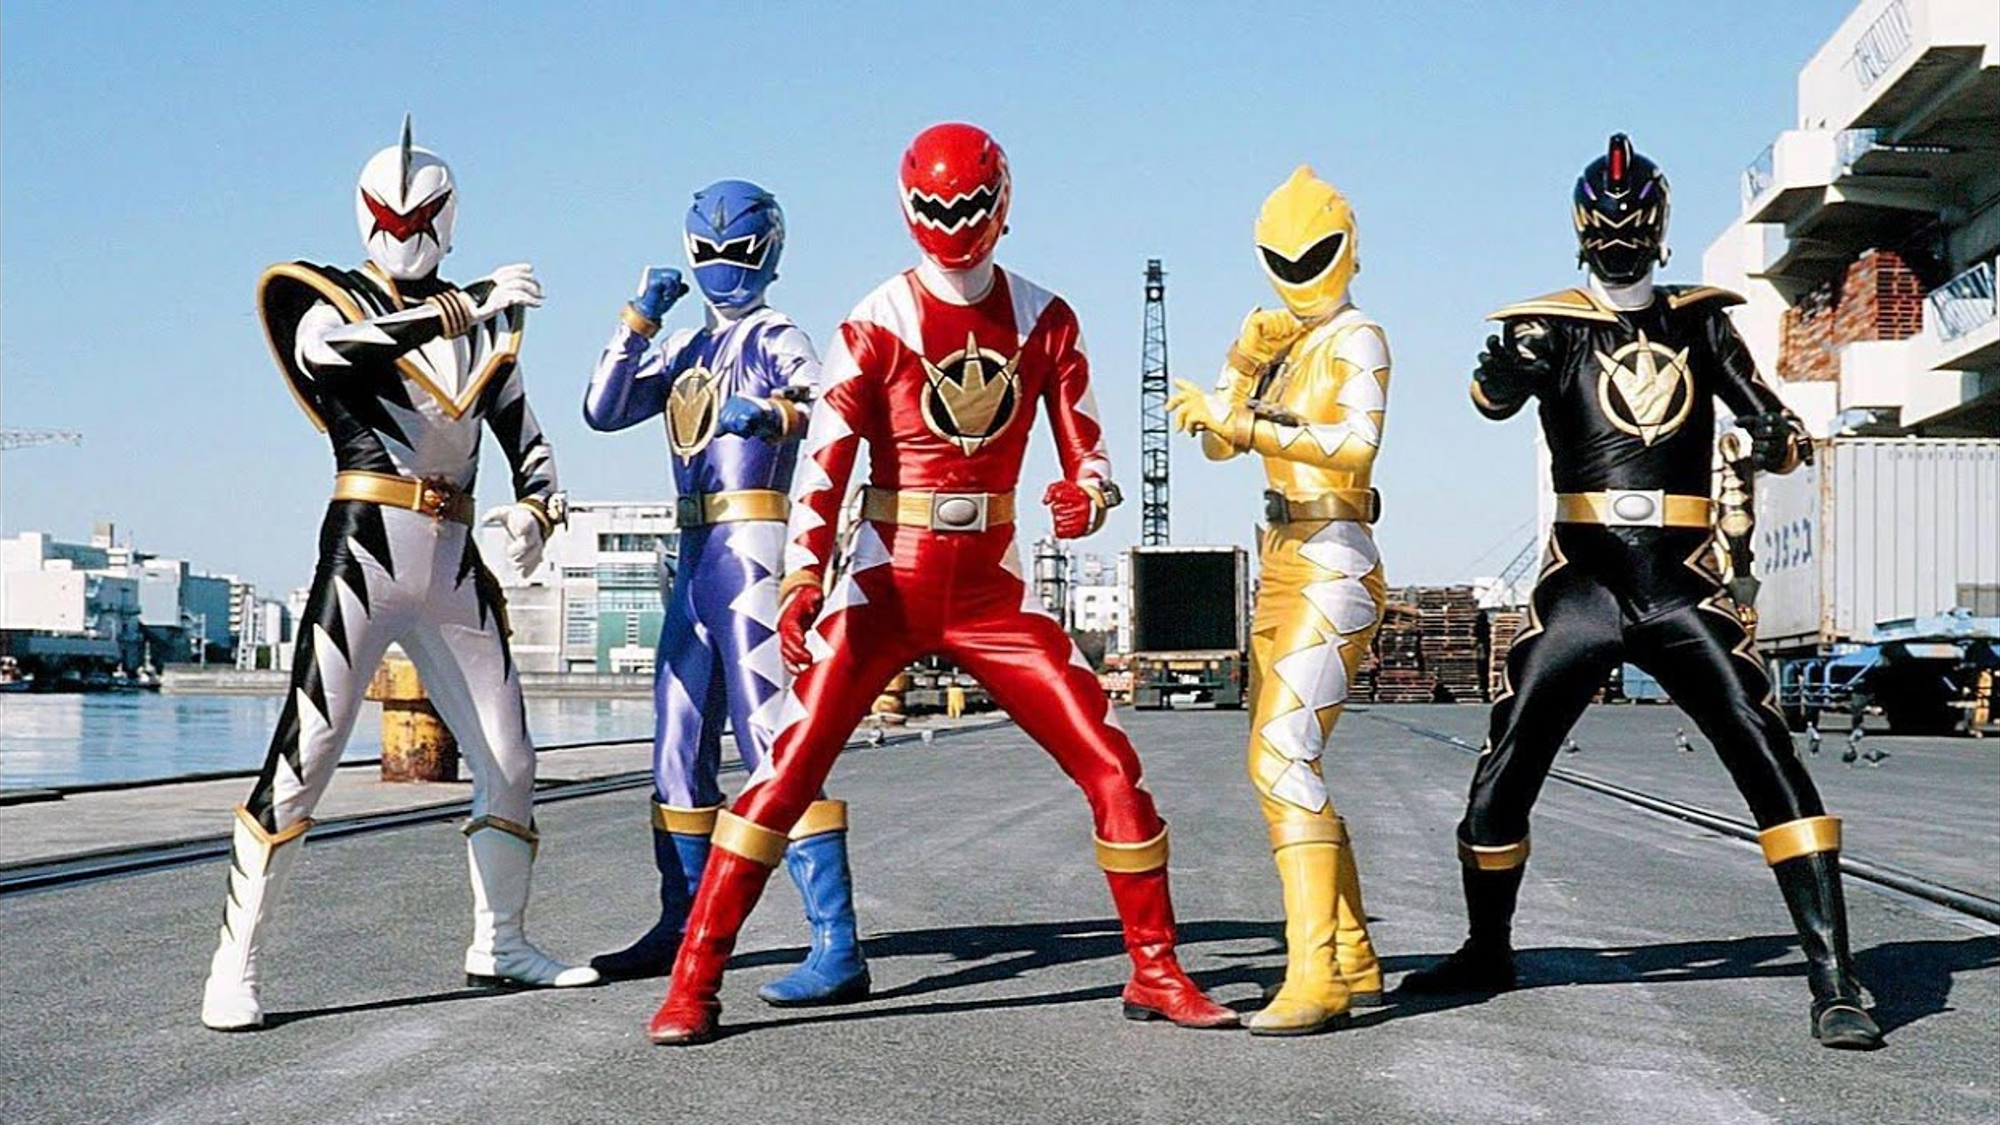 Which Power Rangers Series Would Make the Best Anime